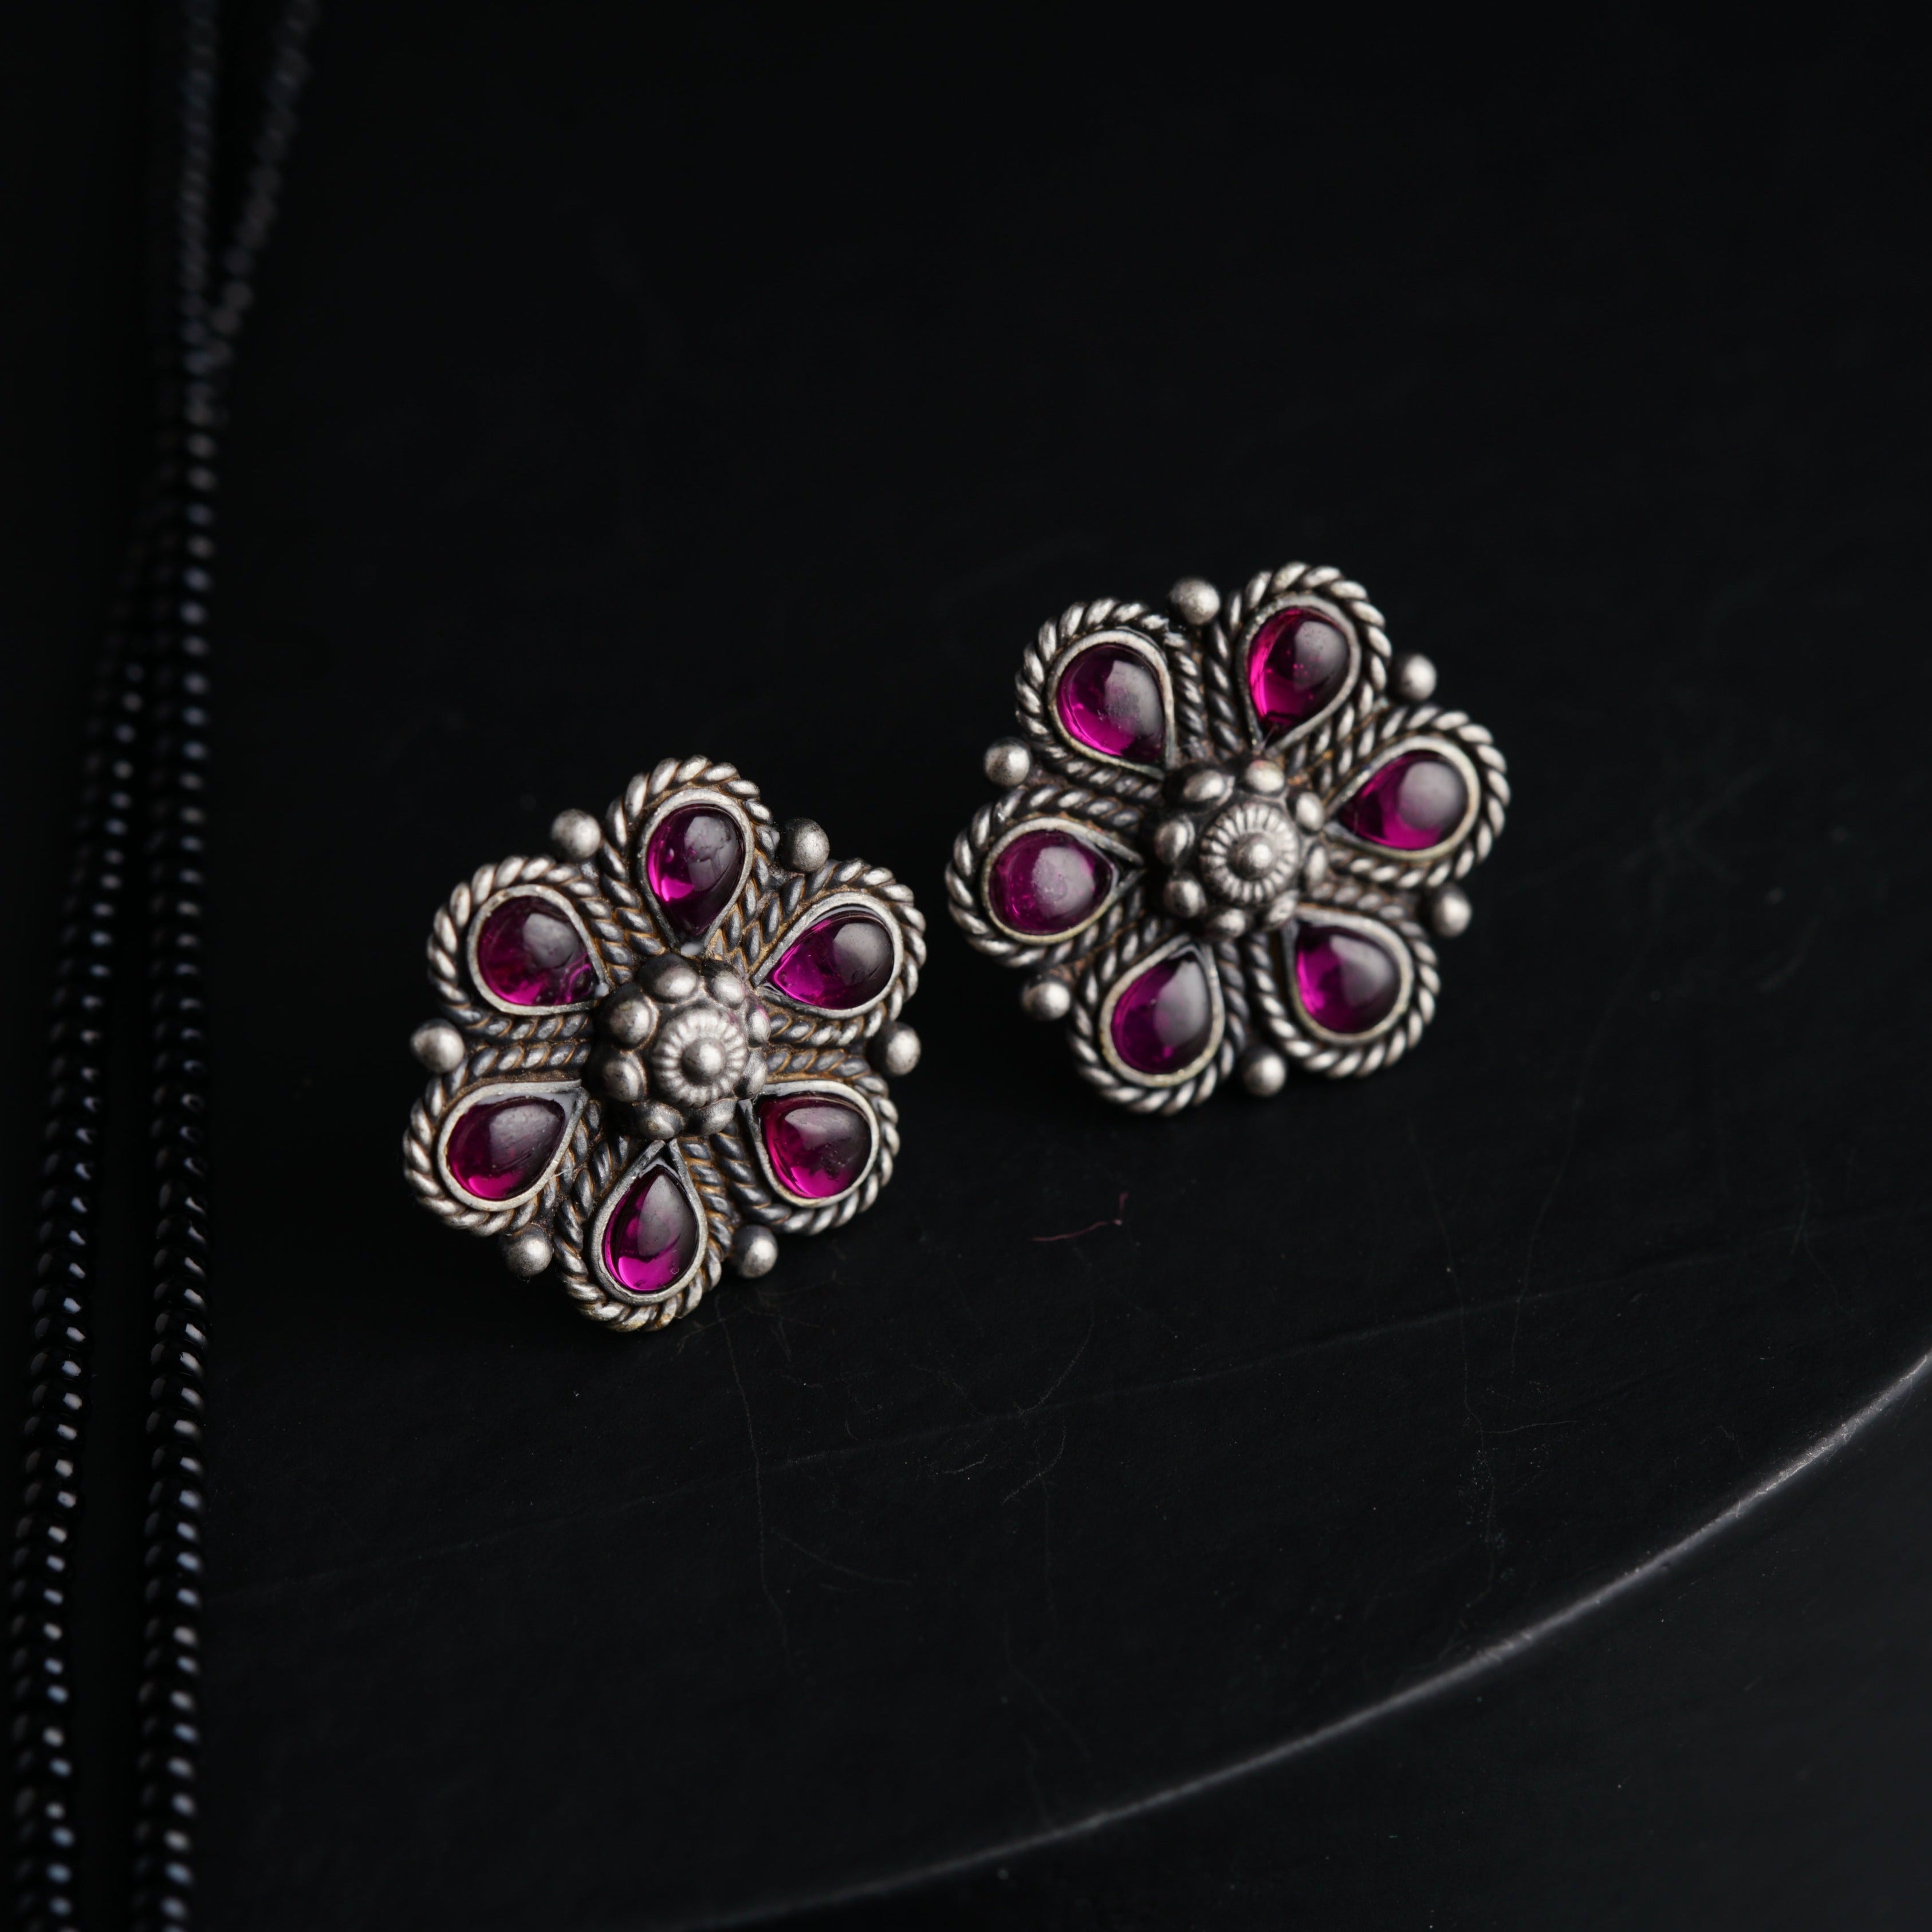 a pair of pink and silver earrings on a black surface